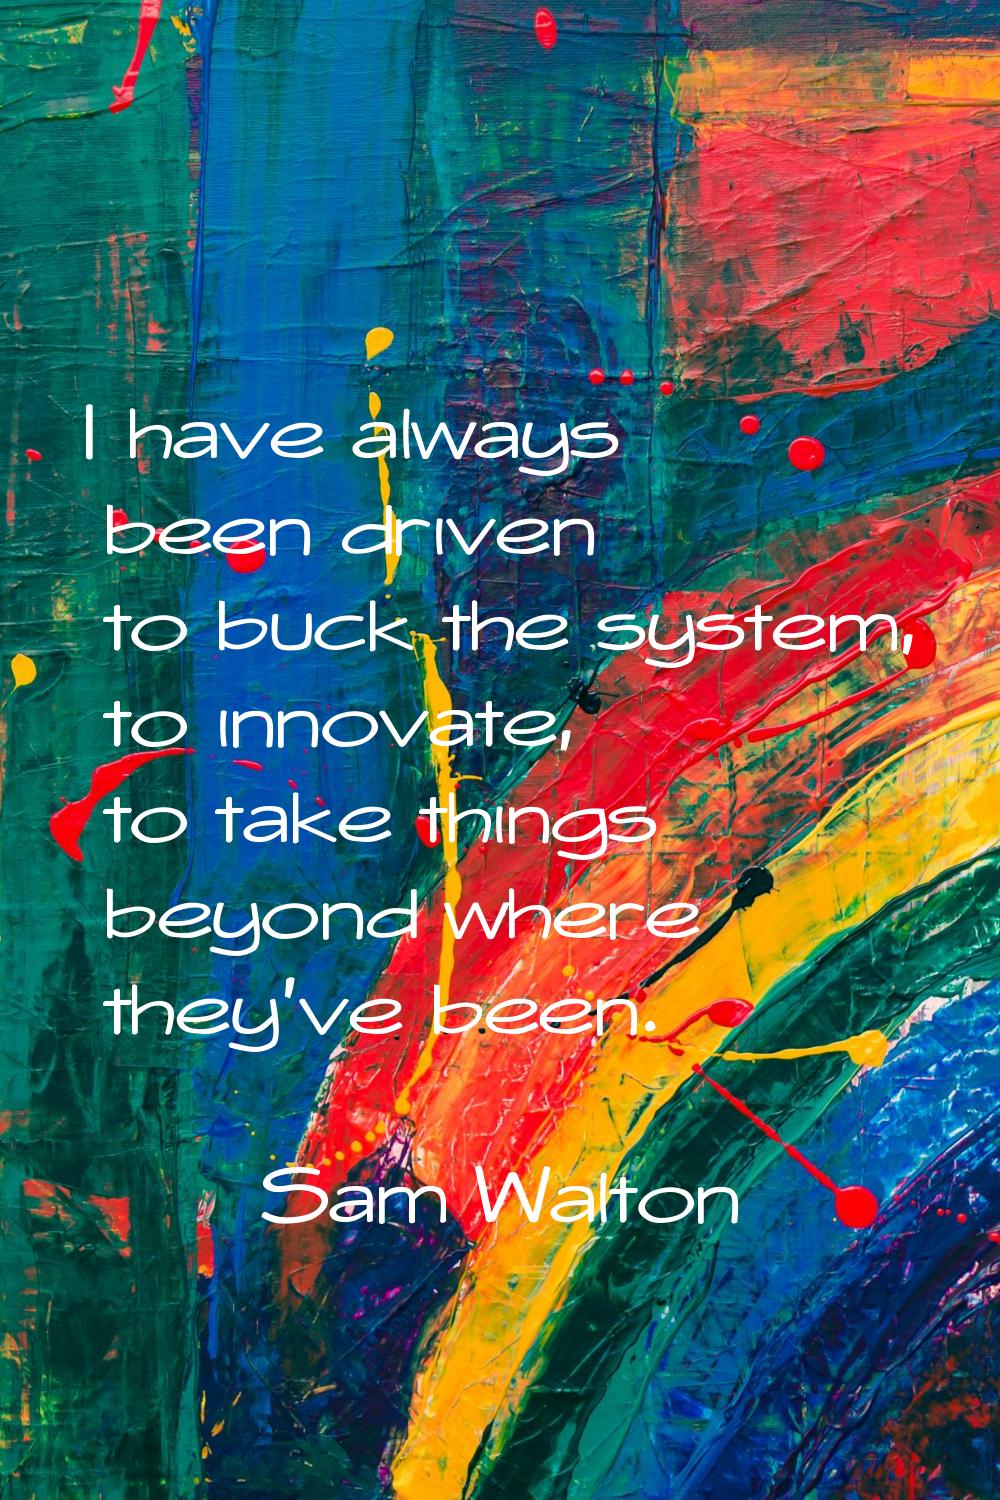 I have always been driven to buck the system, to innovate, to take things beyond where they've been